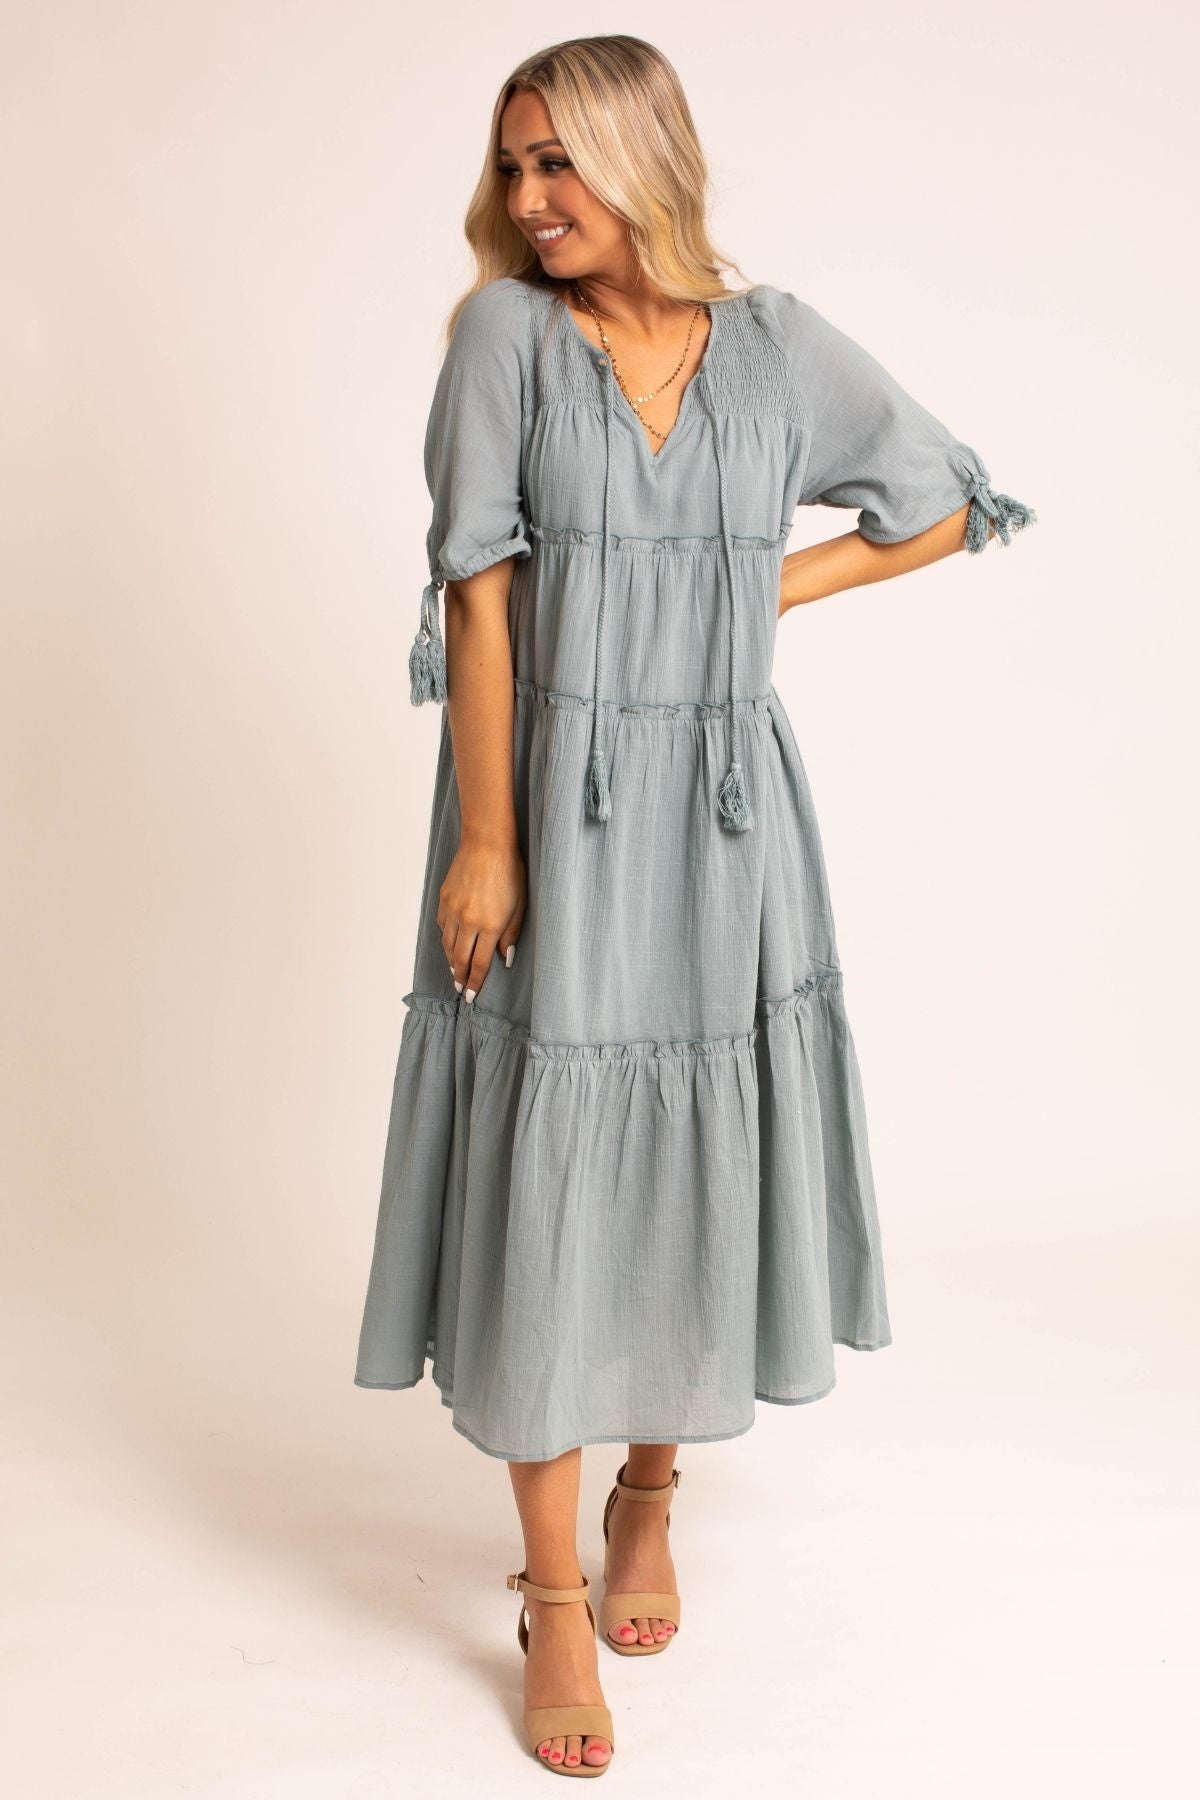 Boutique Dress in Sage Green.